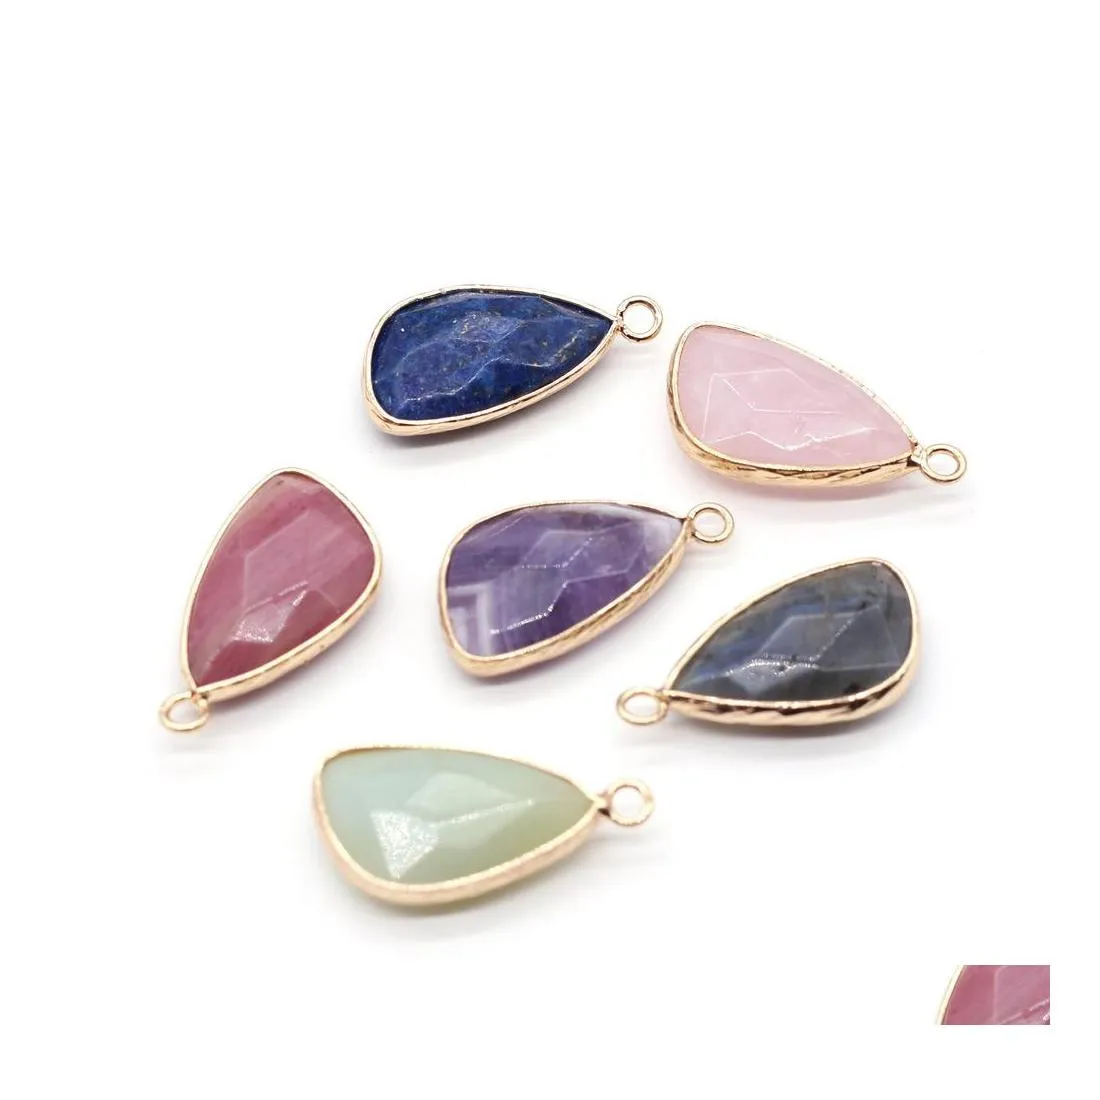 Charms 14X26M Natural Stone Chakra Rose Quartz Healing Reiki Amethyst Crystal Pendant Finding For Diy Men Necklaces Jewelry Sport1 D Dh9Qe